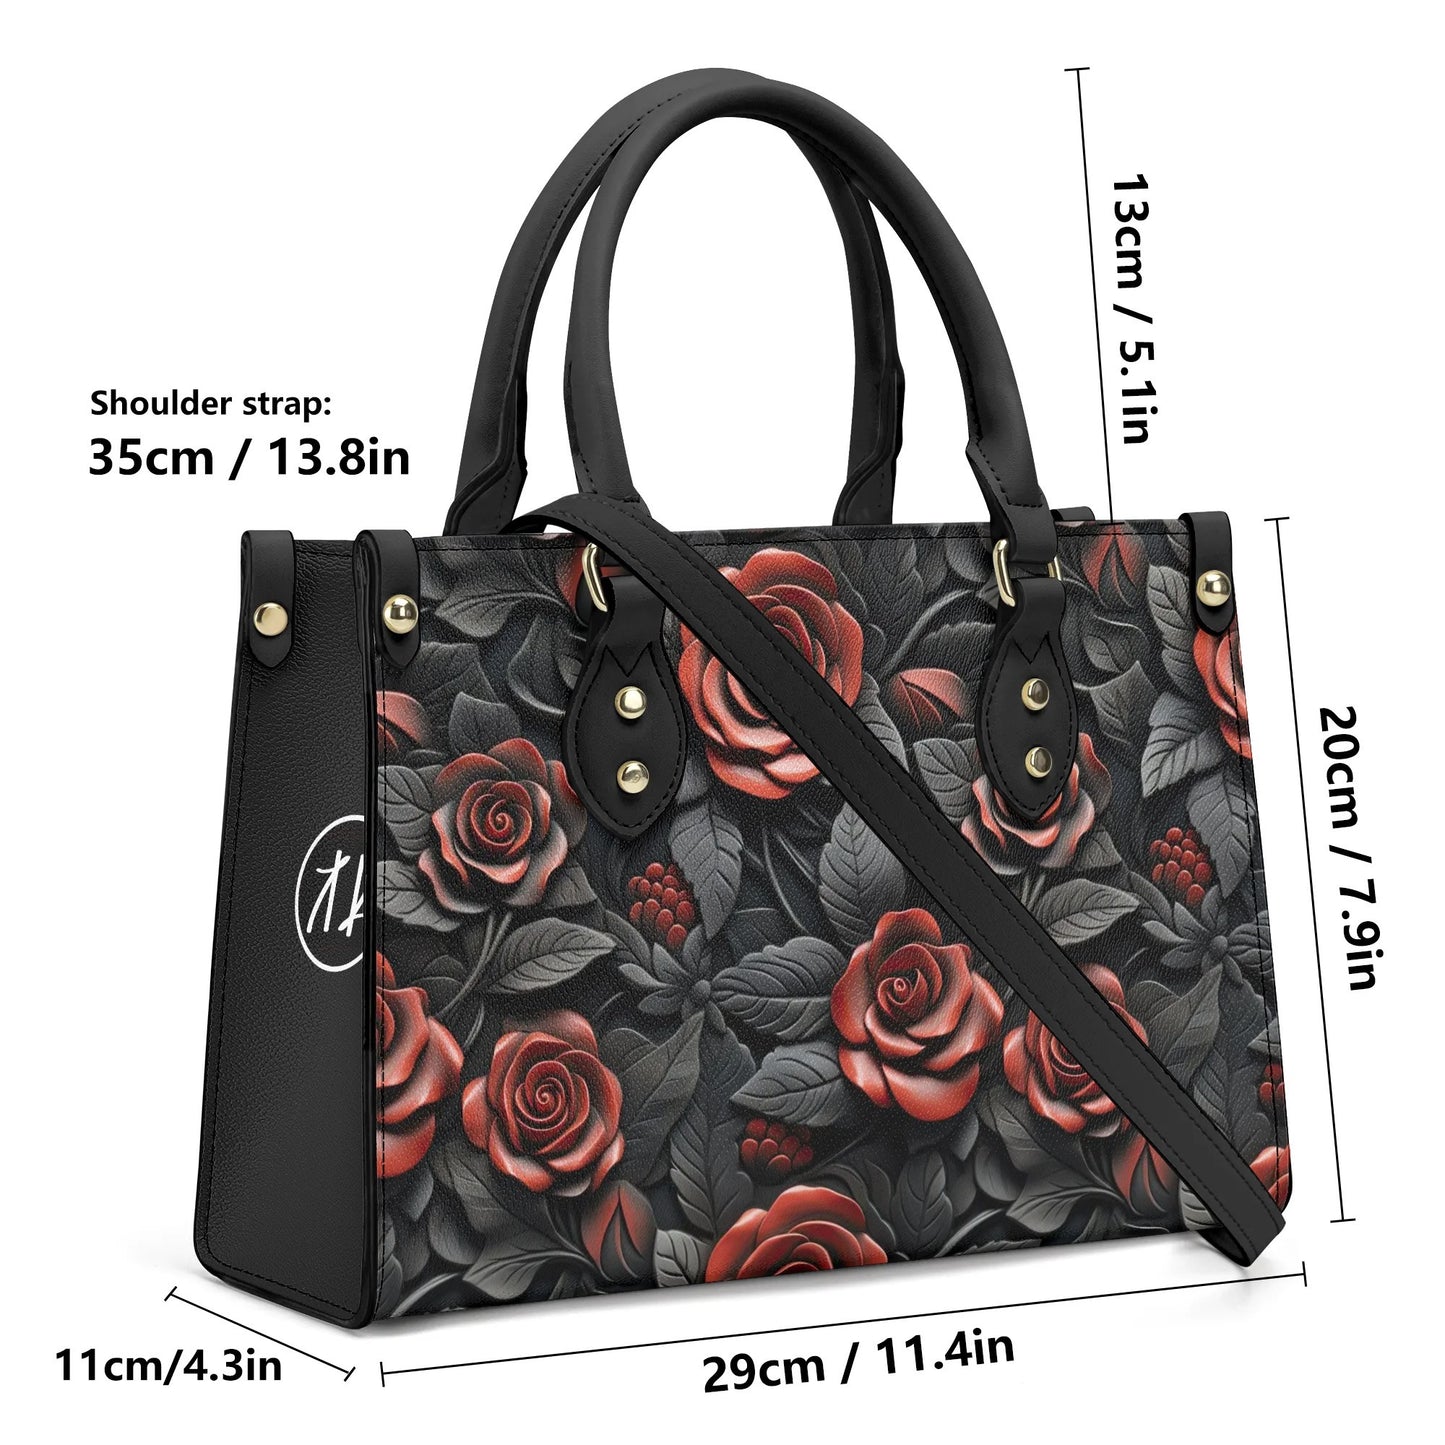 Decay of Roses Leather Bag